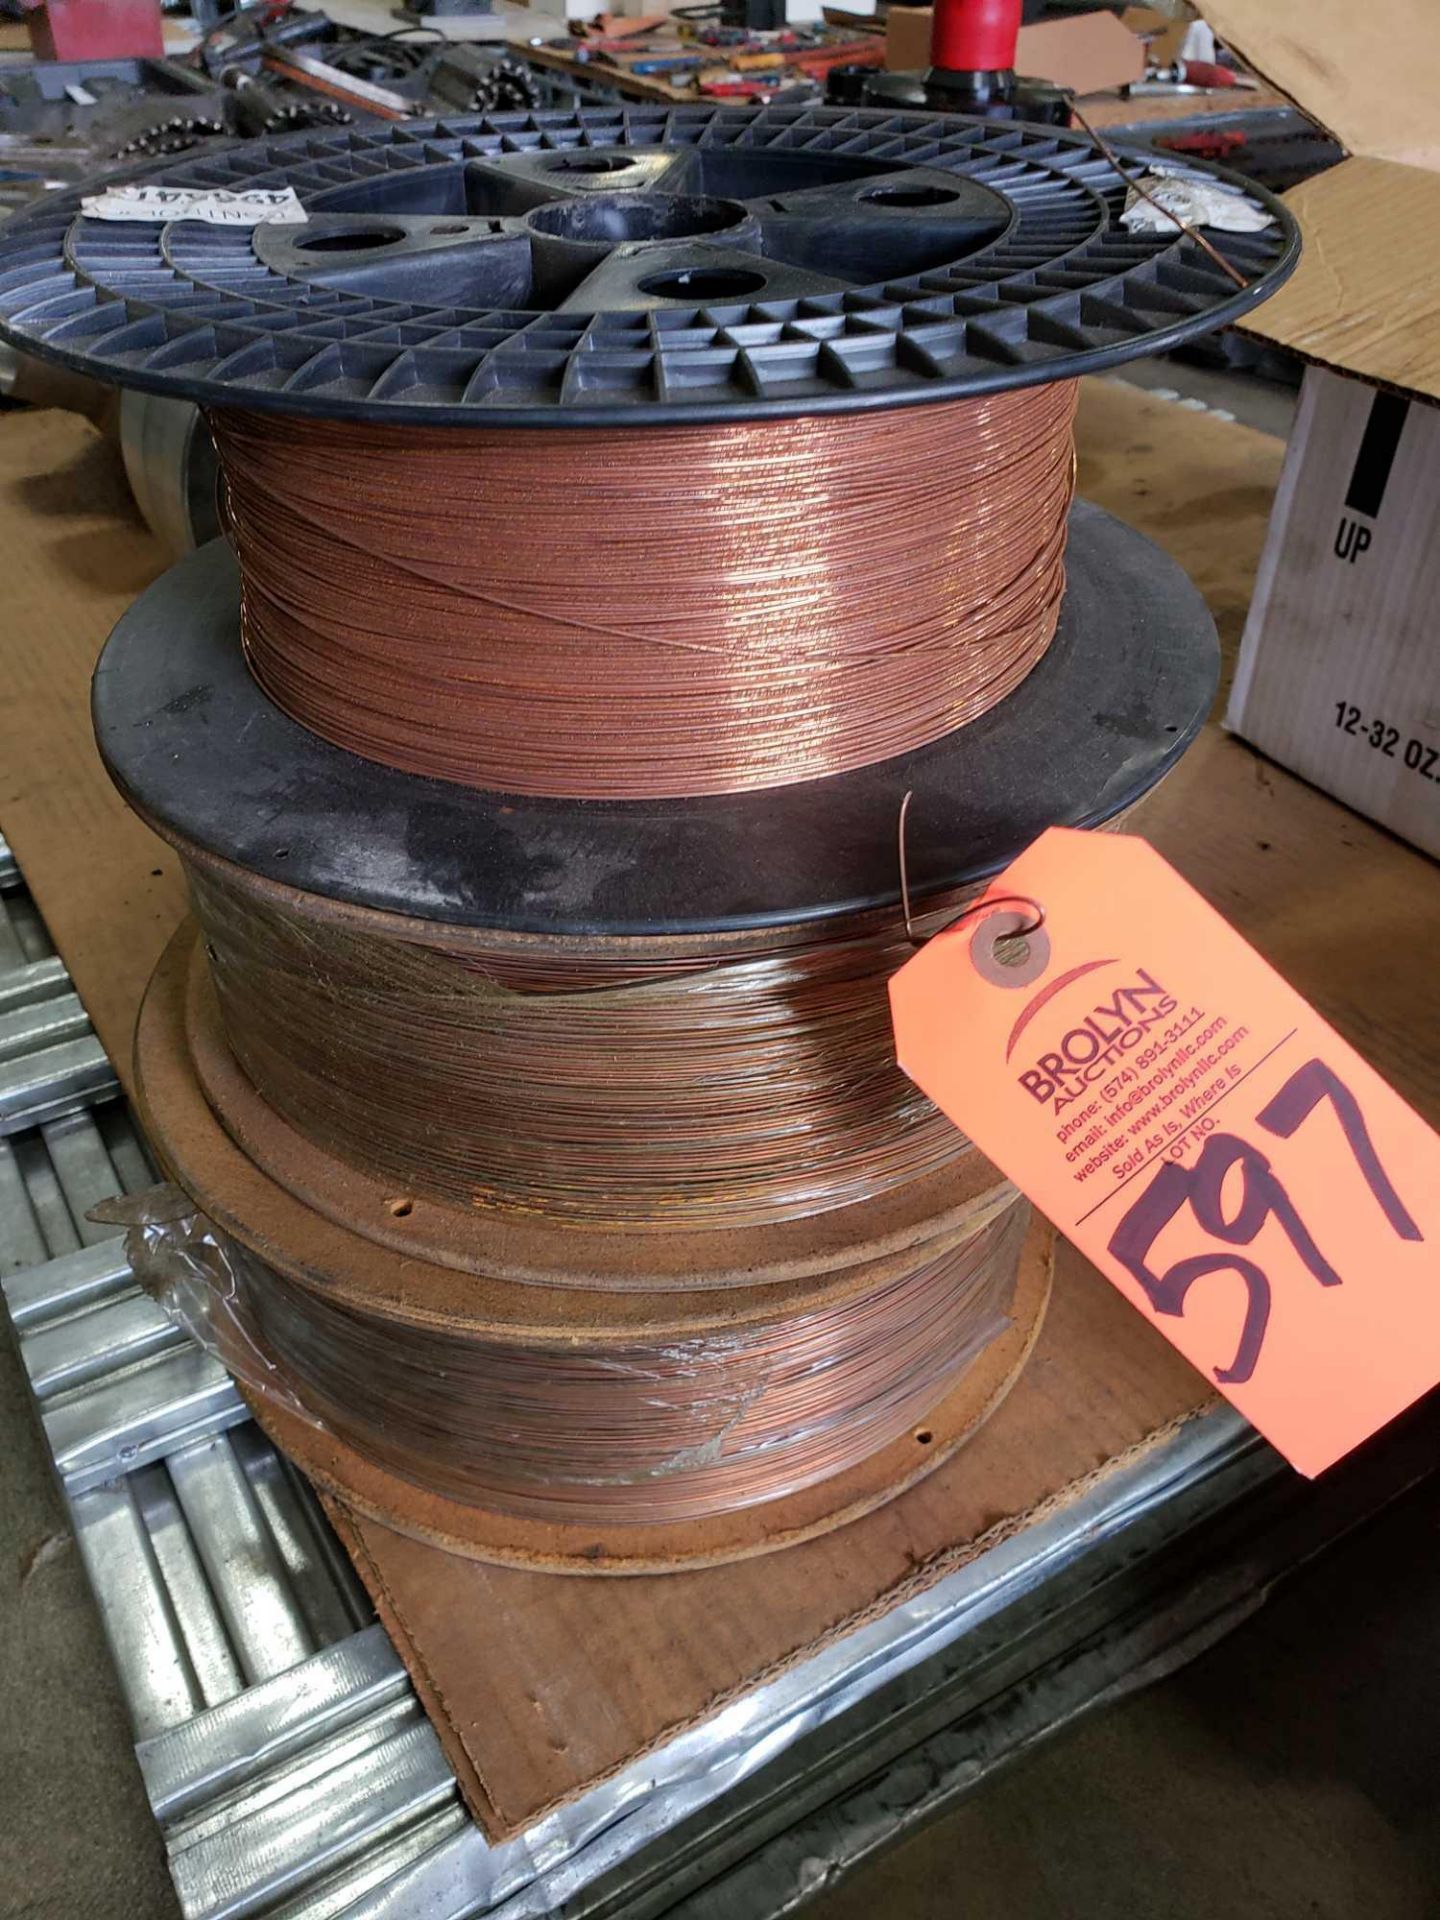 Qty 3 - rolls of assorted welding wire.